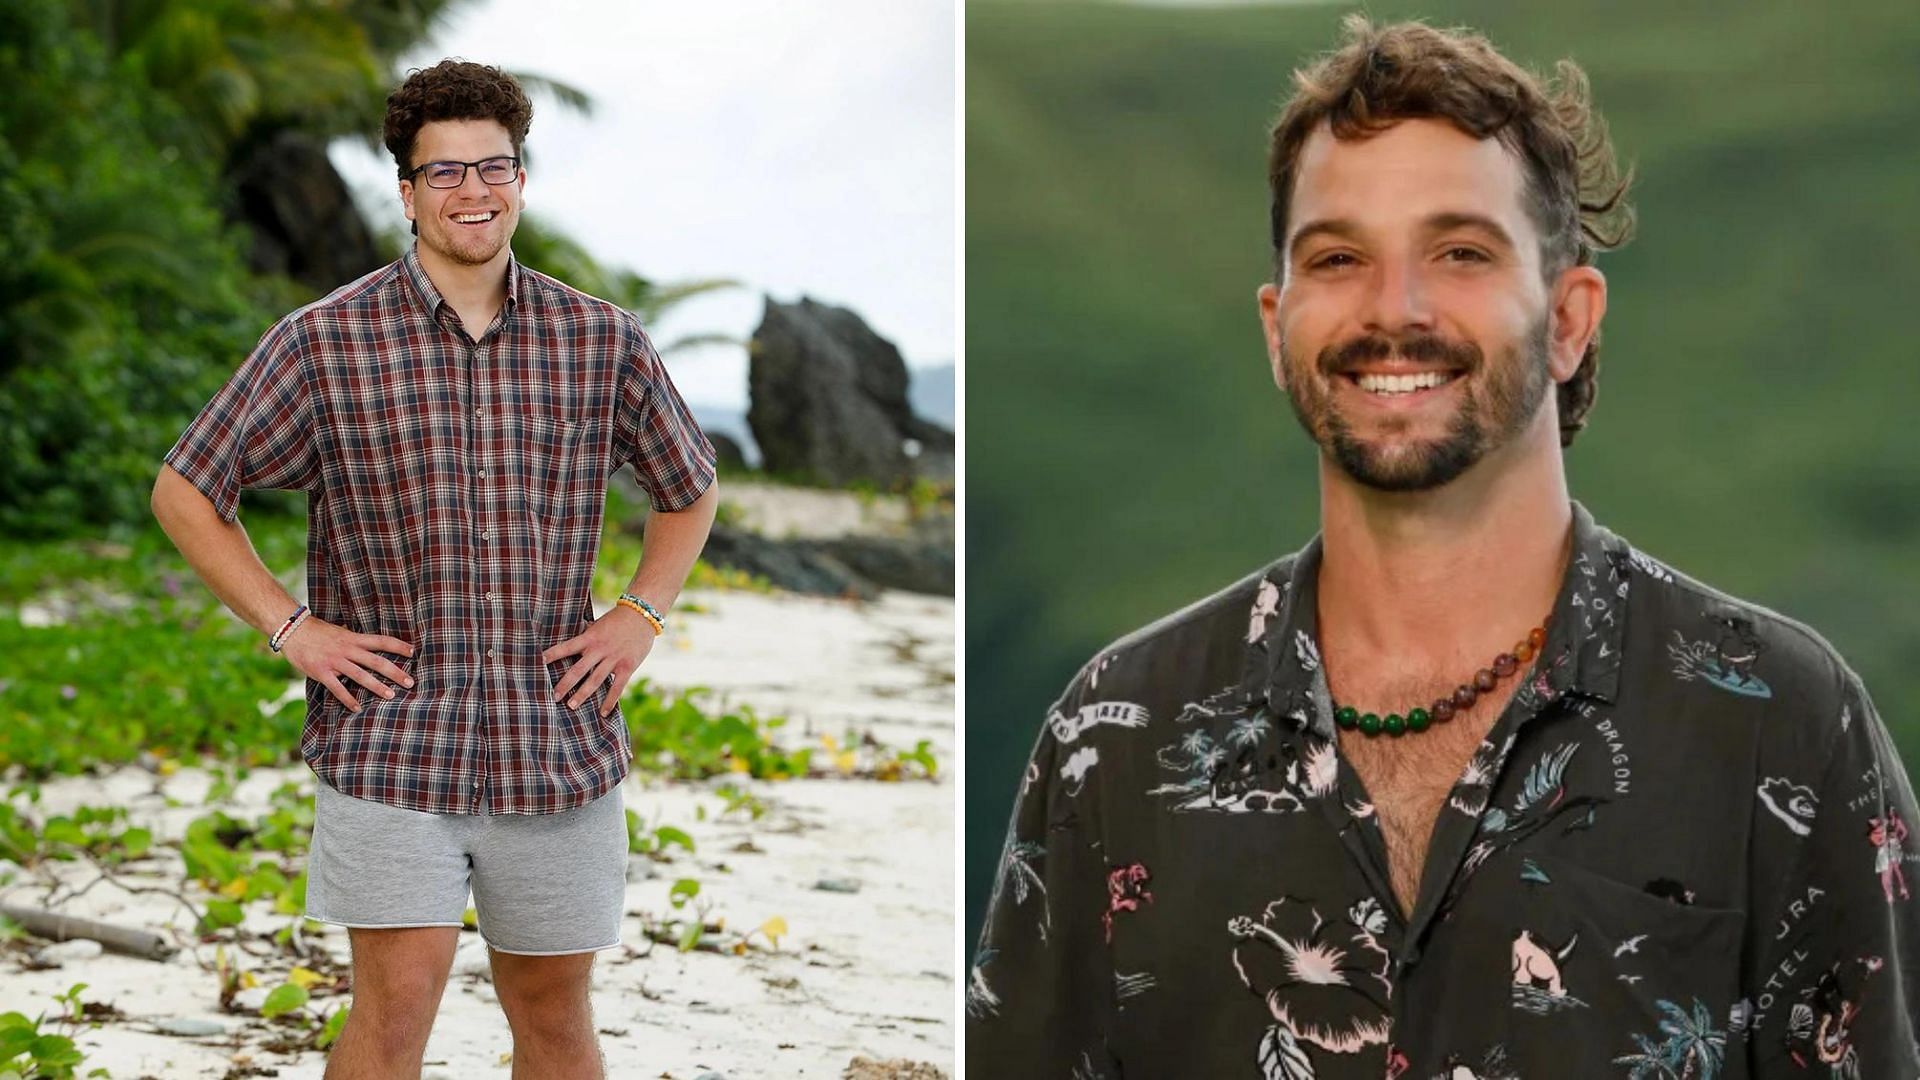 Sami and Cody are initial fan favorites on Survivor Season 43